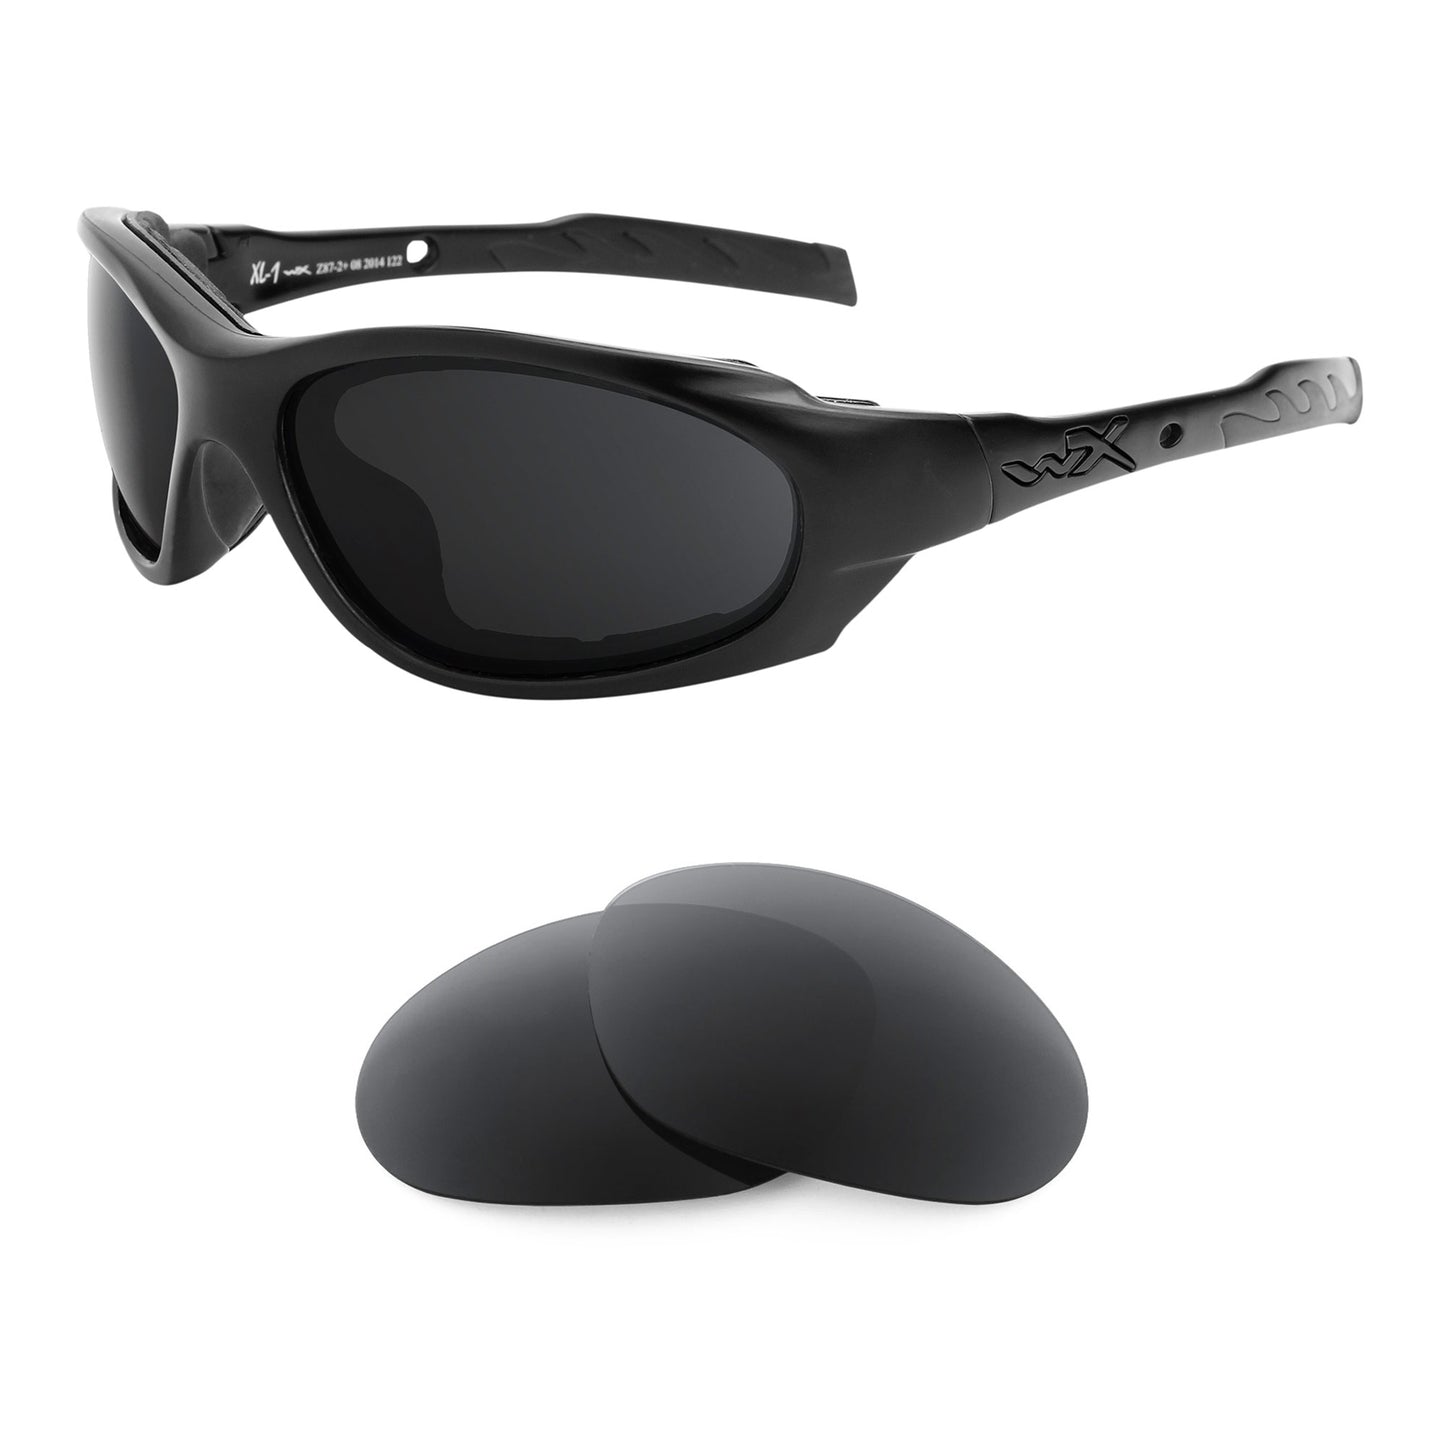 Wiley X XL-1 Advanced sunglasses with replacement lenses